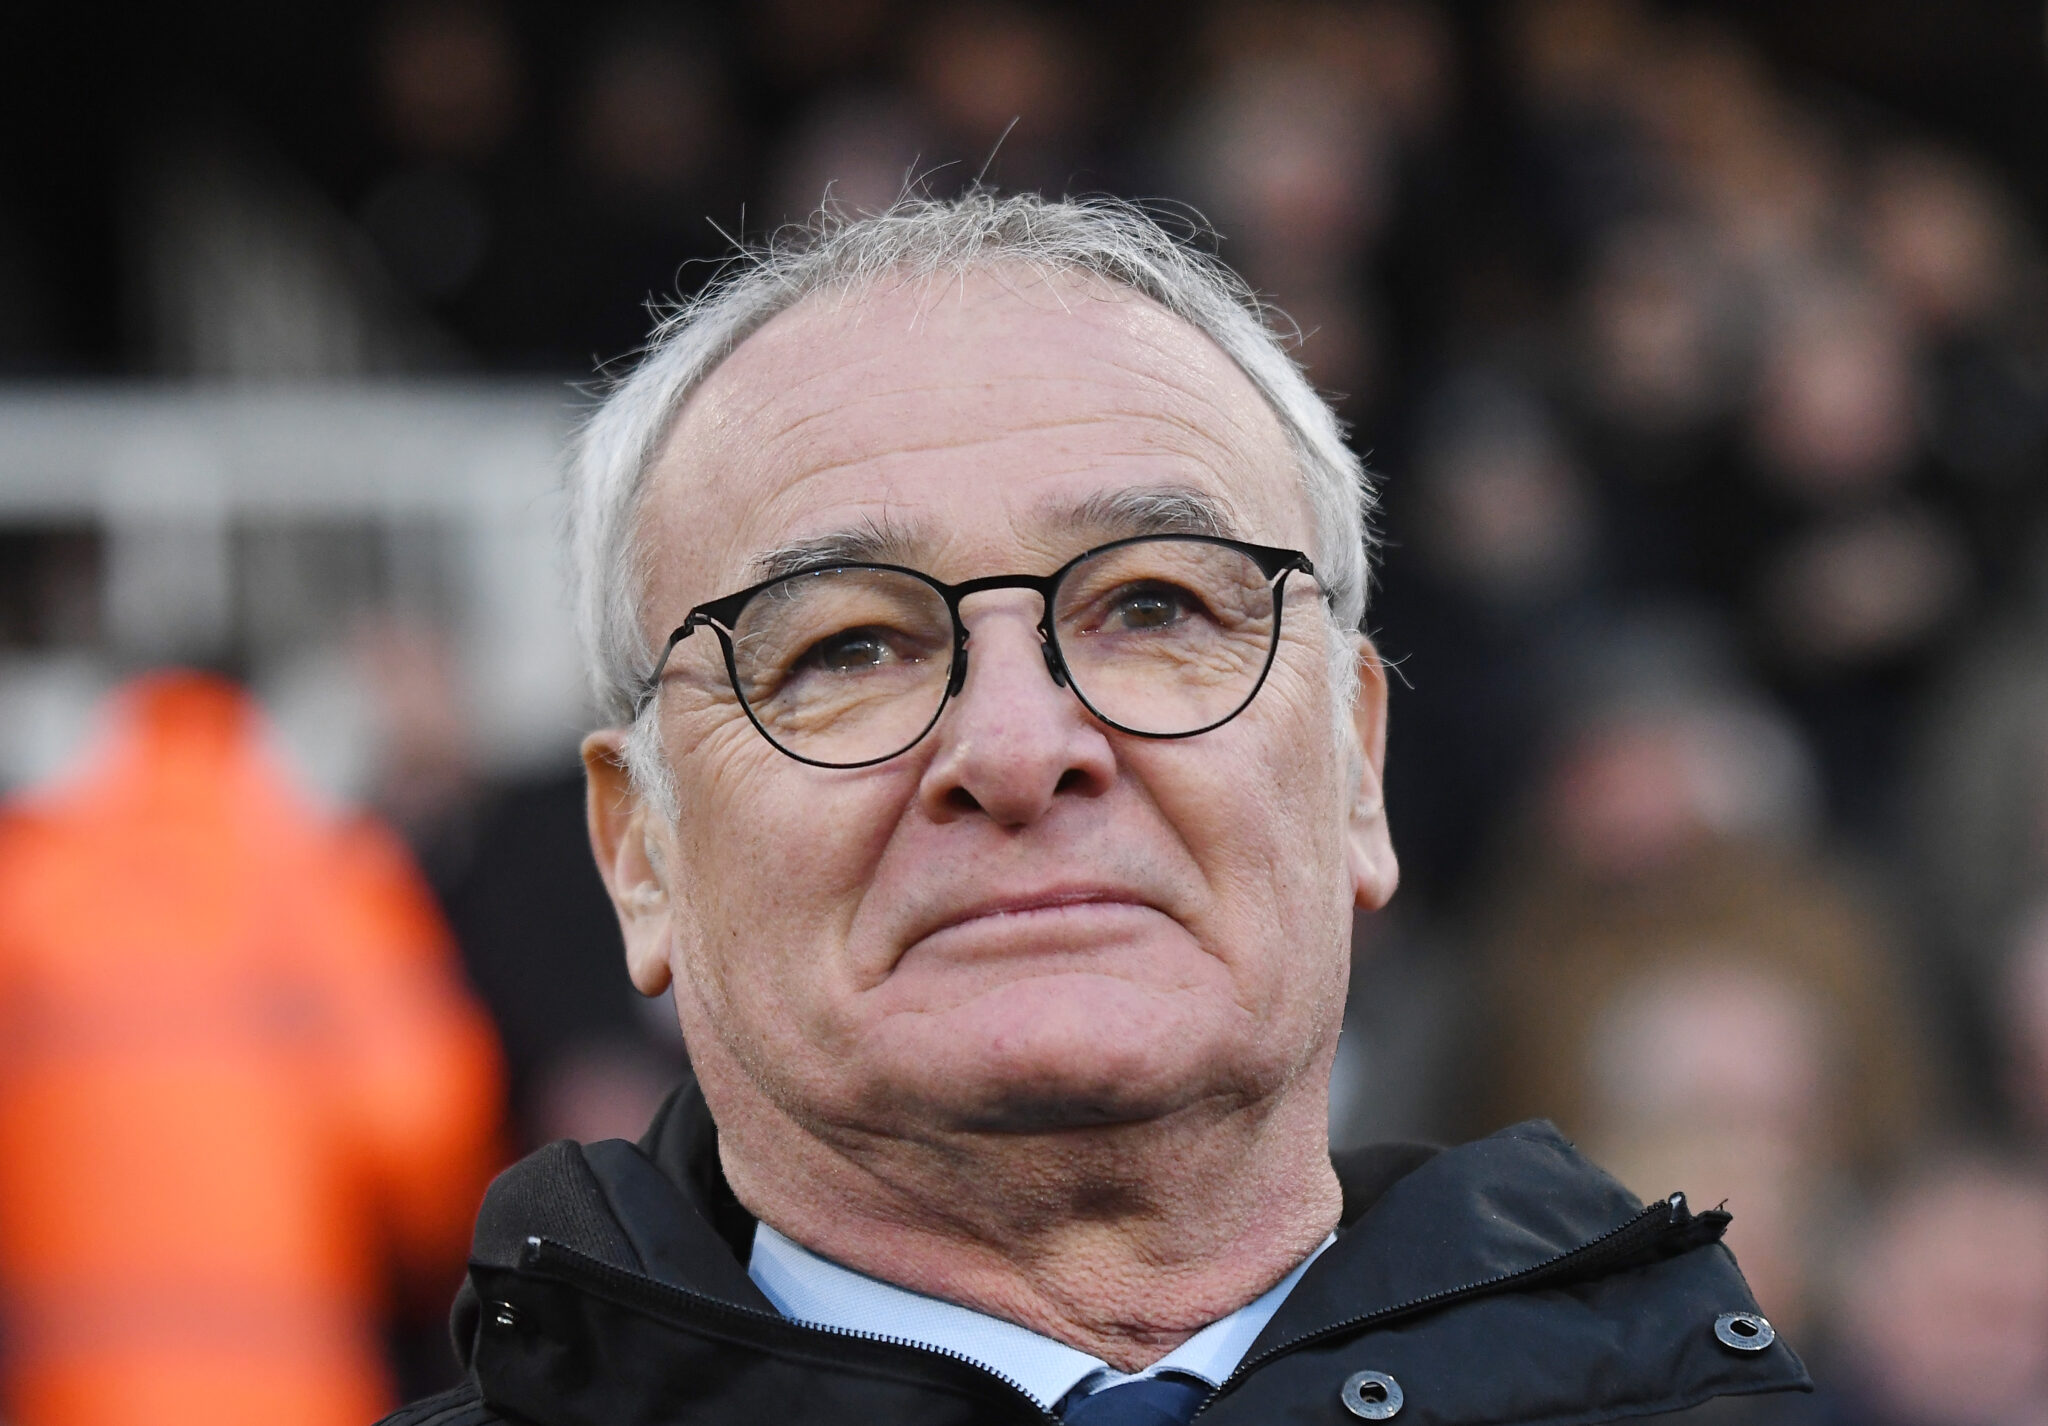 Ranieri is finally seeing some positive results in Sardinia, with a second straight win in Serie A now lifting the Isolani marginally above the drop zone.